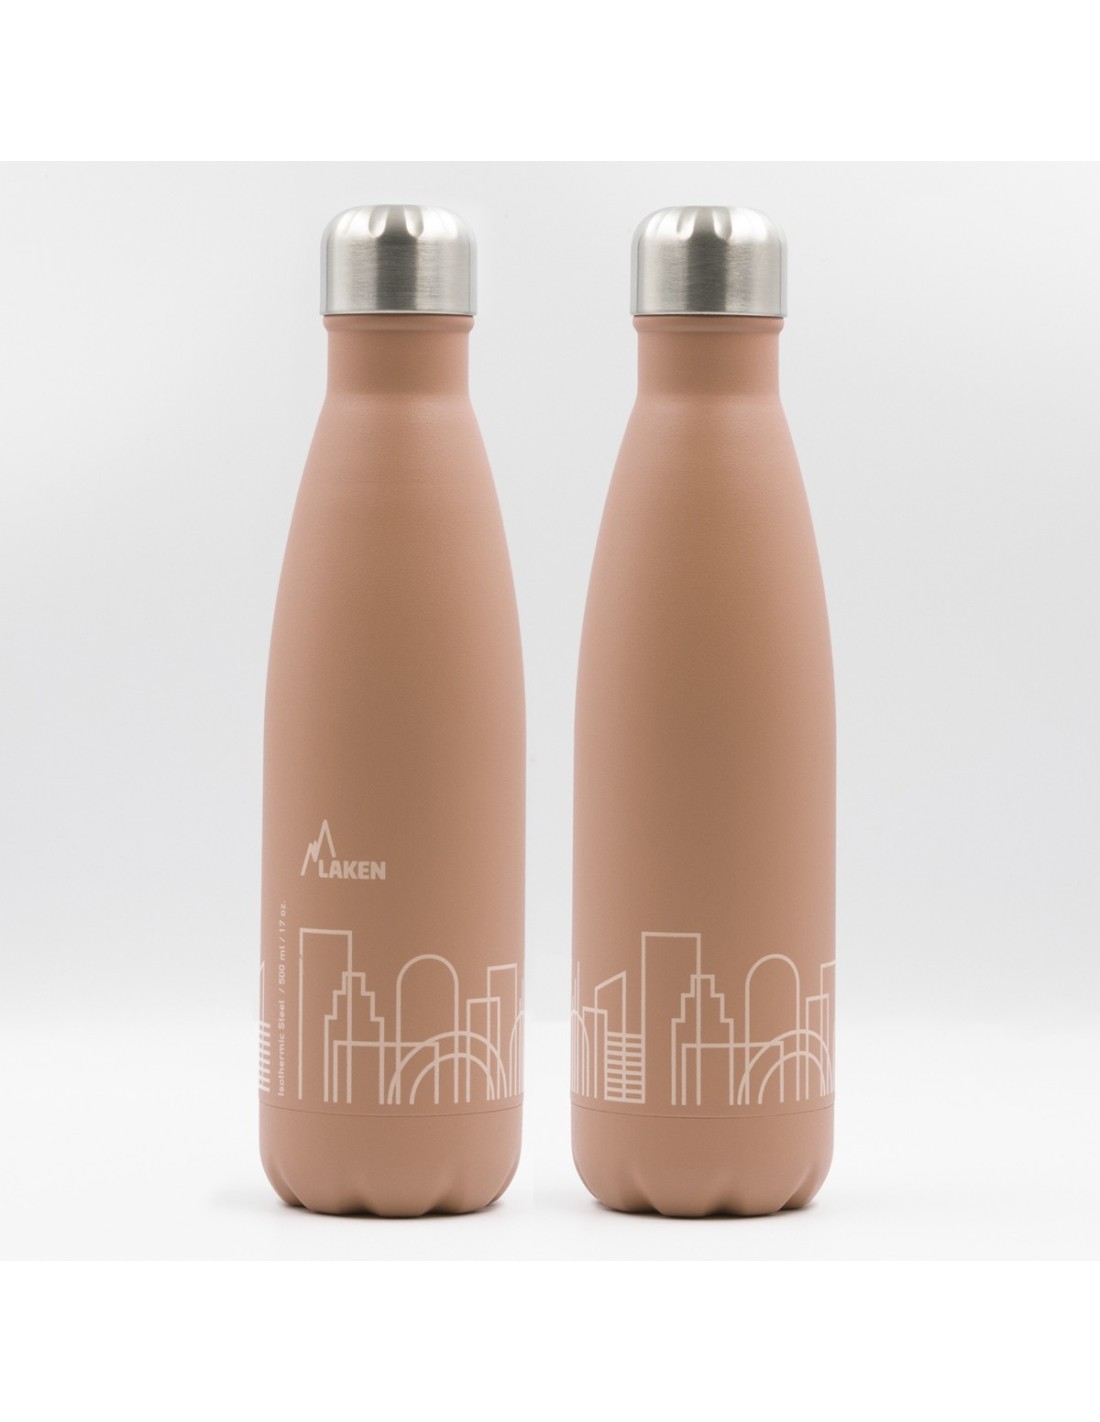 STAINLESS STEEL THERMO BOTTLE 0.5L - LAKENJOY DRINK LIFE! CITY (NARROW MOUTH)